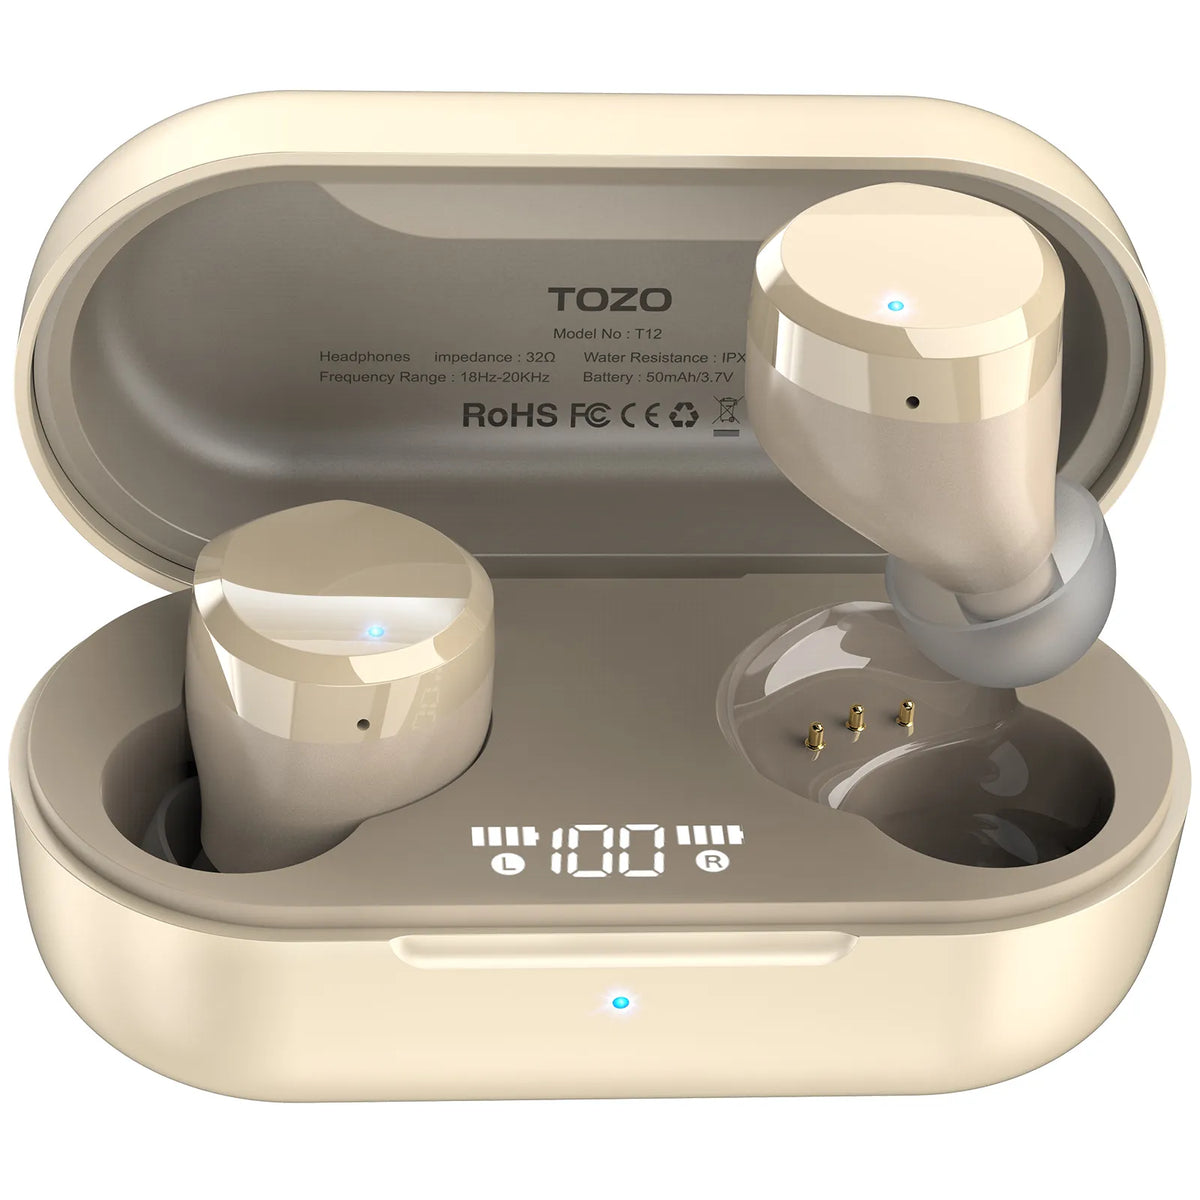 Tozo T12 Earbuds – How To Pair 